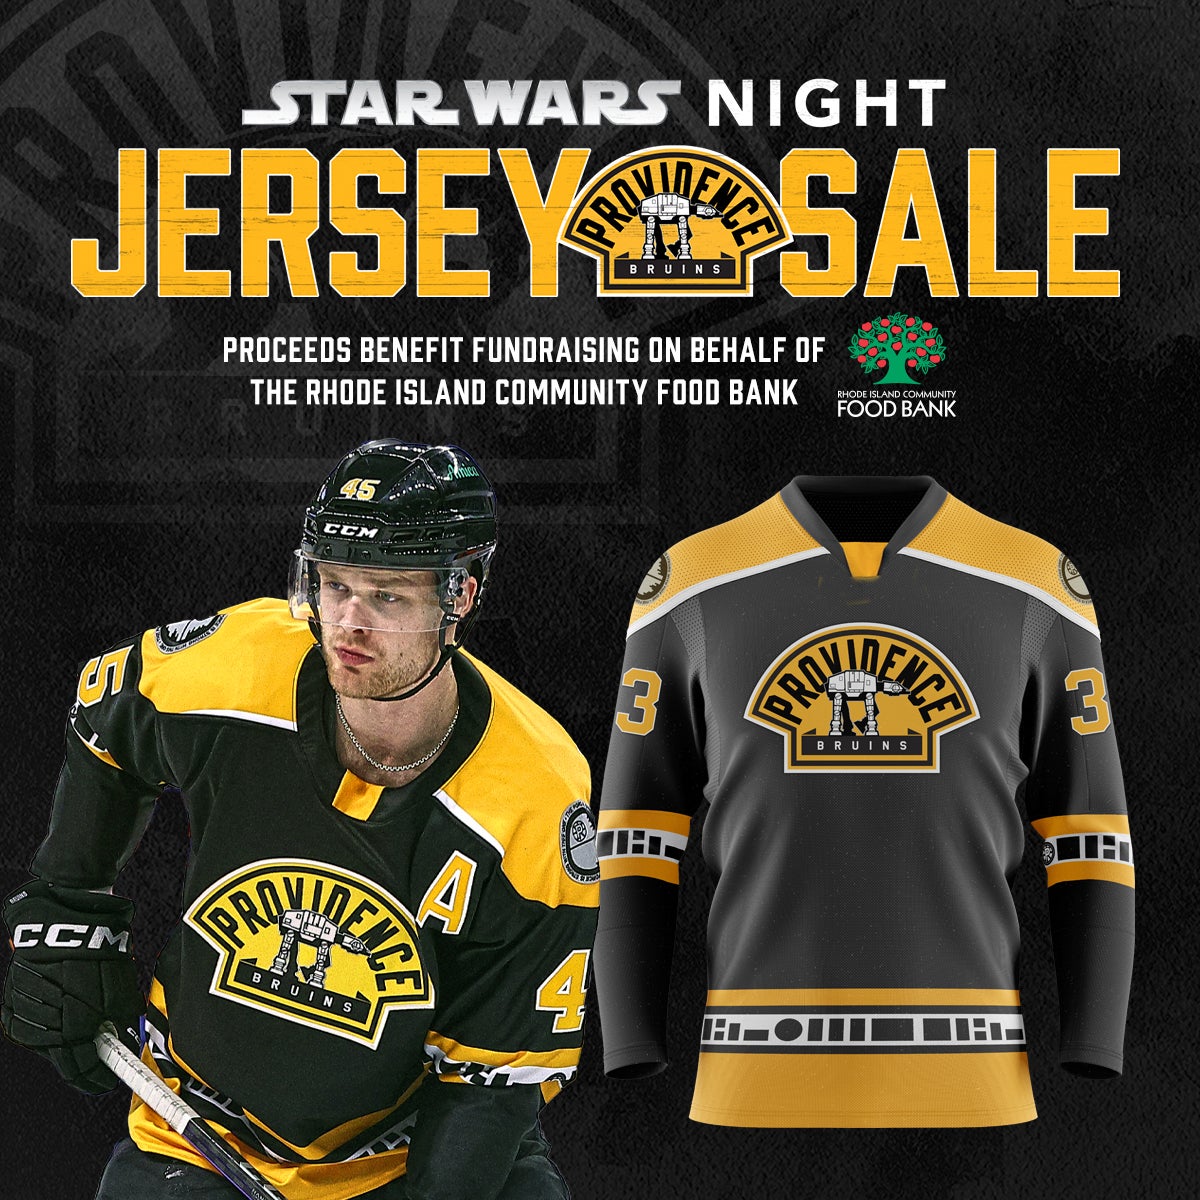 Select game worn jerseys from our - Maine Mariners Hockey